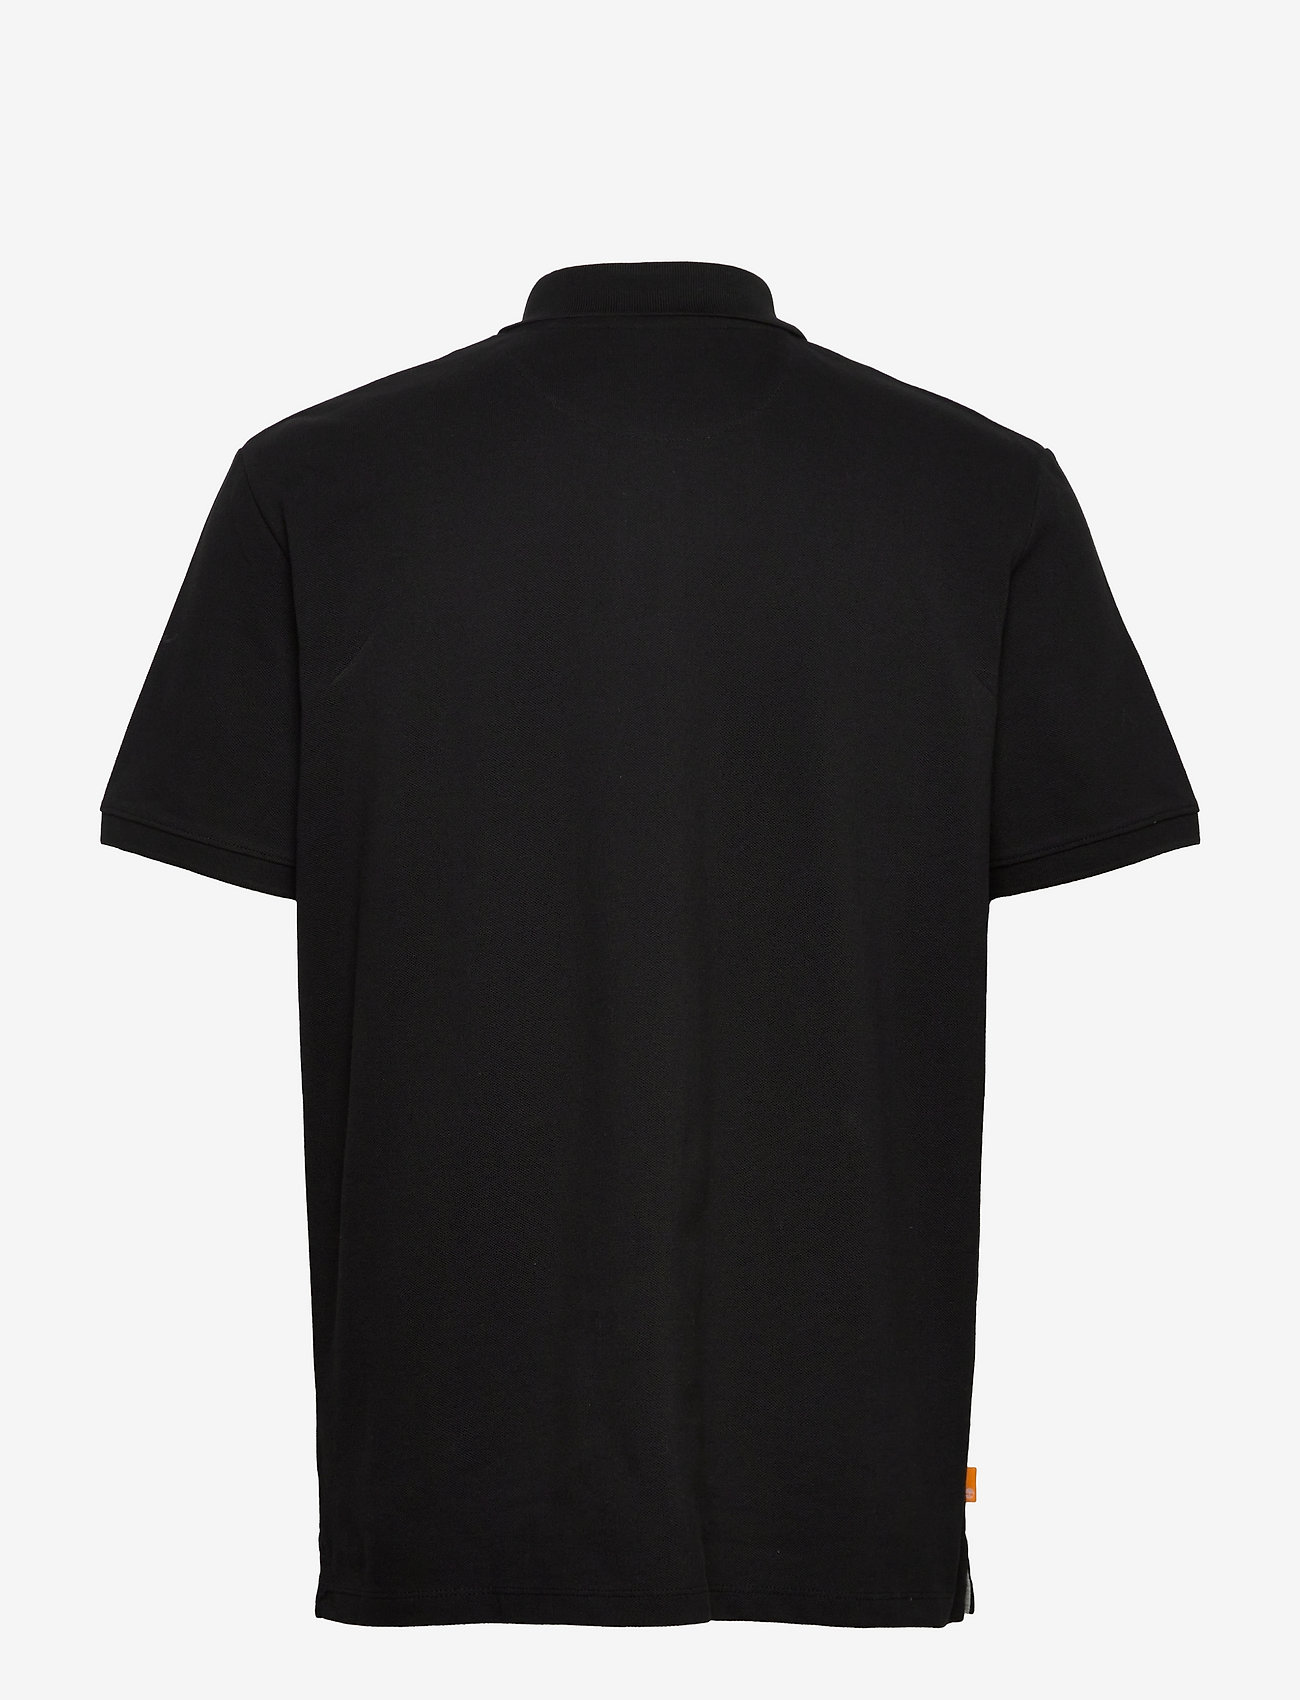 Timberland - MILLERS RIVER Pique Short Sleeve Polo BLACK - short-sleeved polos - black - 1